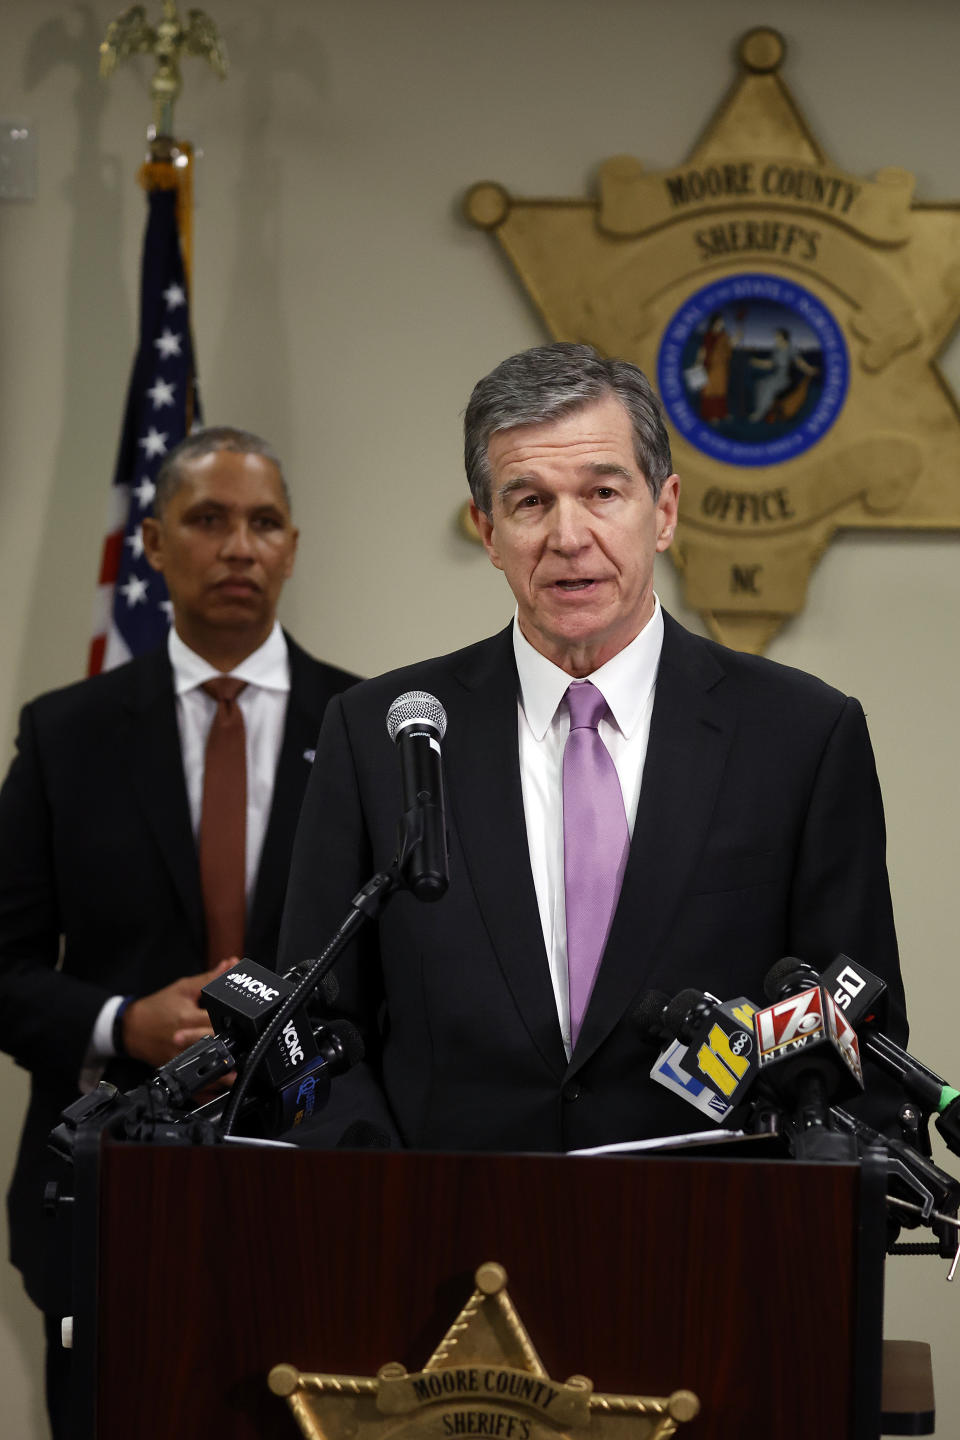 Democratic Gov. Roy Cooper, right, with North Carolina Department of Public Safety Secretary Eddie M Buffaloe, back left, speaks at a news conference at the Moore County Sheriffs Office in Carthage, N.C., Monday, Dec. 5, 2022, regarding an attack on critical infrastructure that has caused a power outage to many around Moore County. (AP Photo/Karl B DeBlaker)